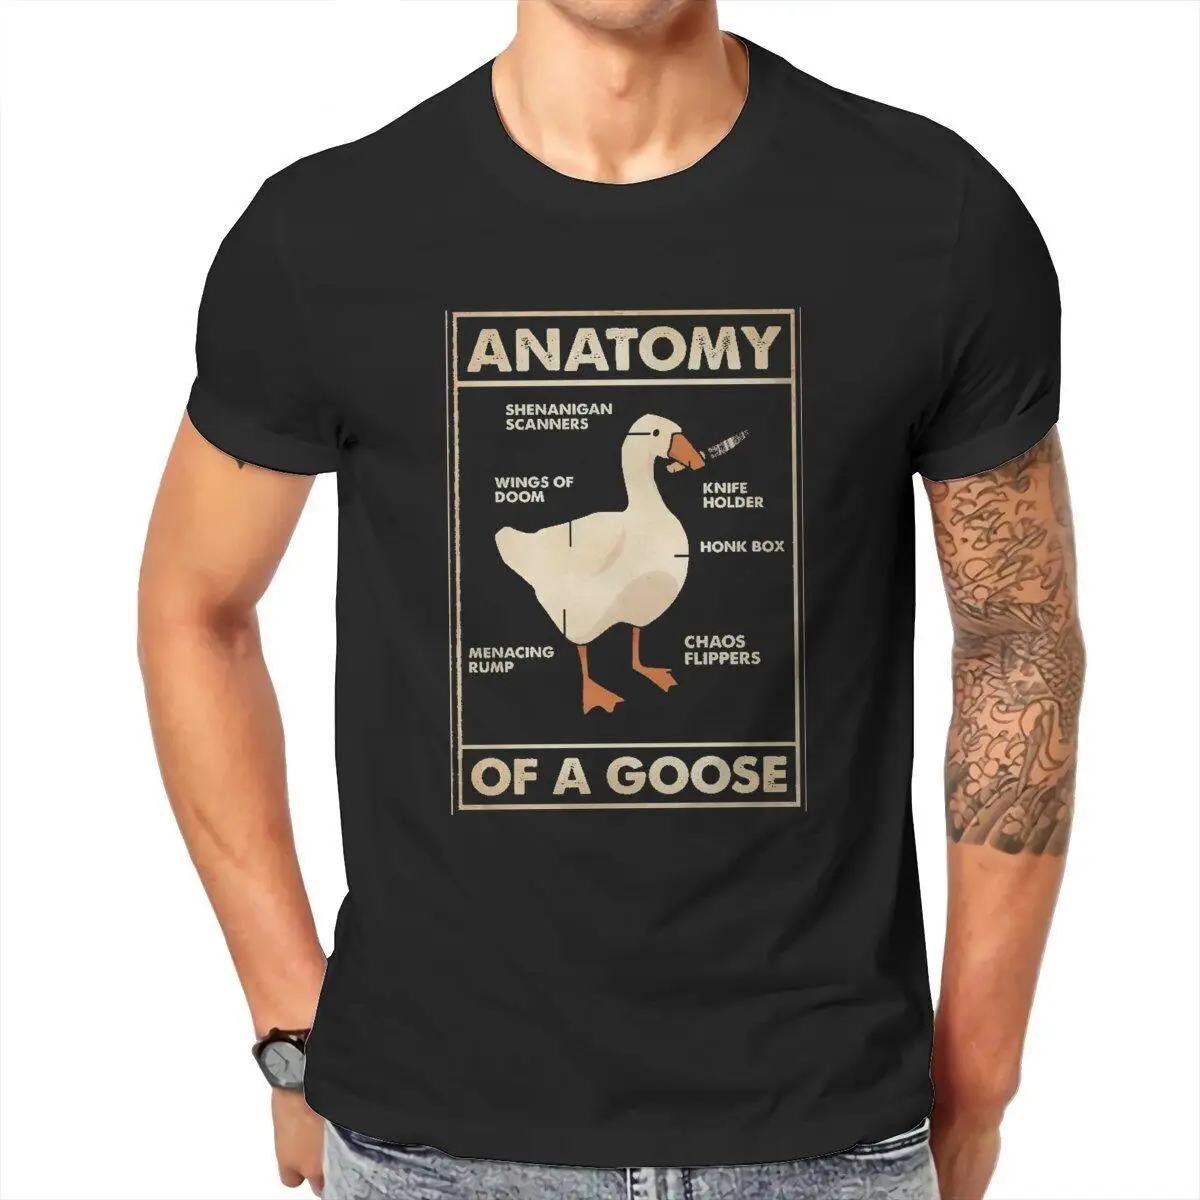 Anatomy Of A Goose Funny Duck  Men T Shirt Untitled Goose Game Novelty Tee Shirt Short Sleeve T-Shirts Cotton 5XL 6XL Clothing